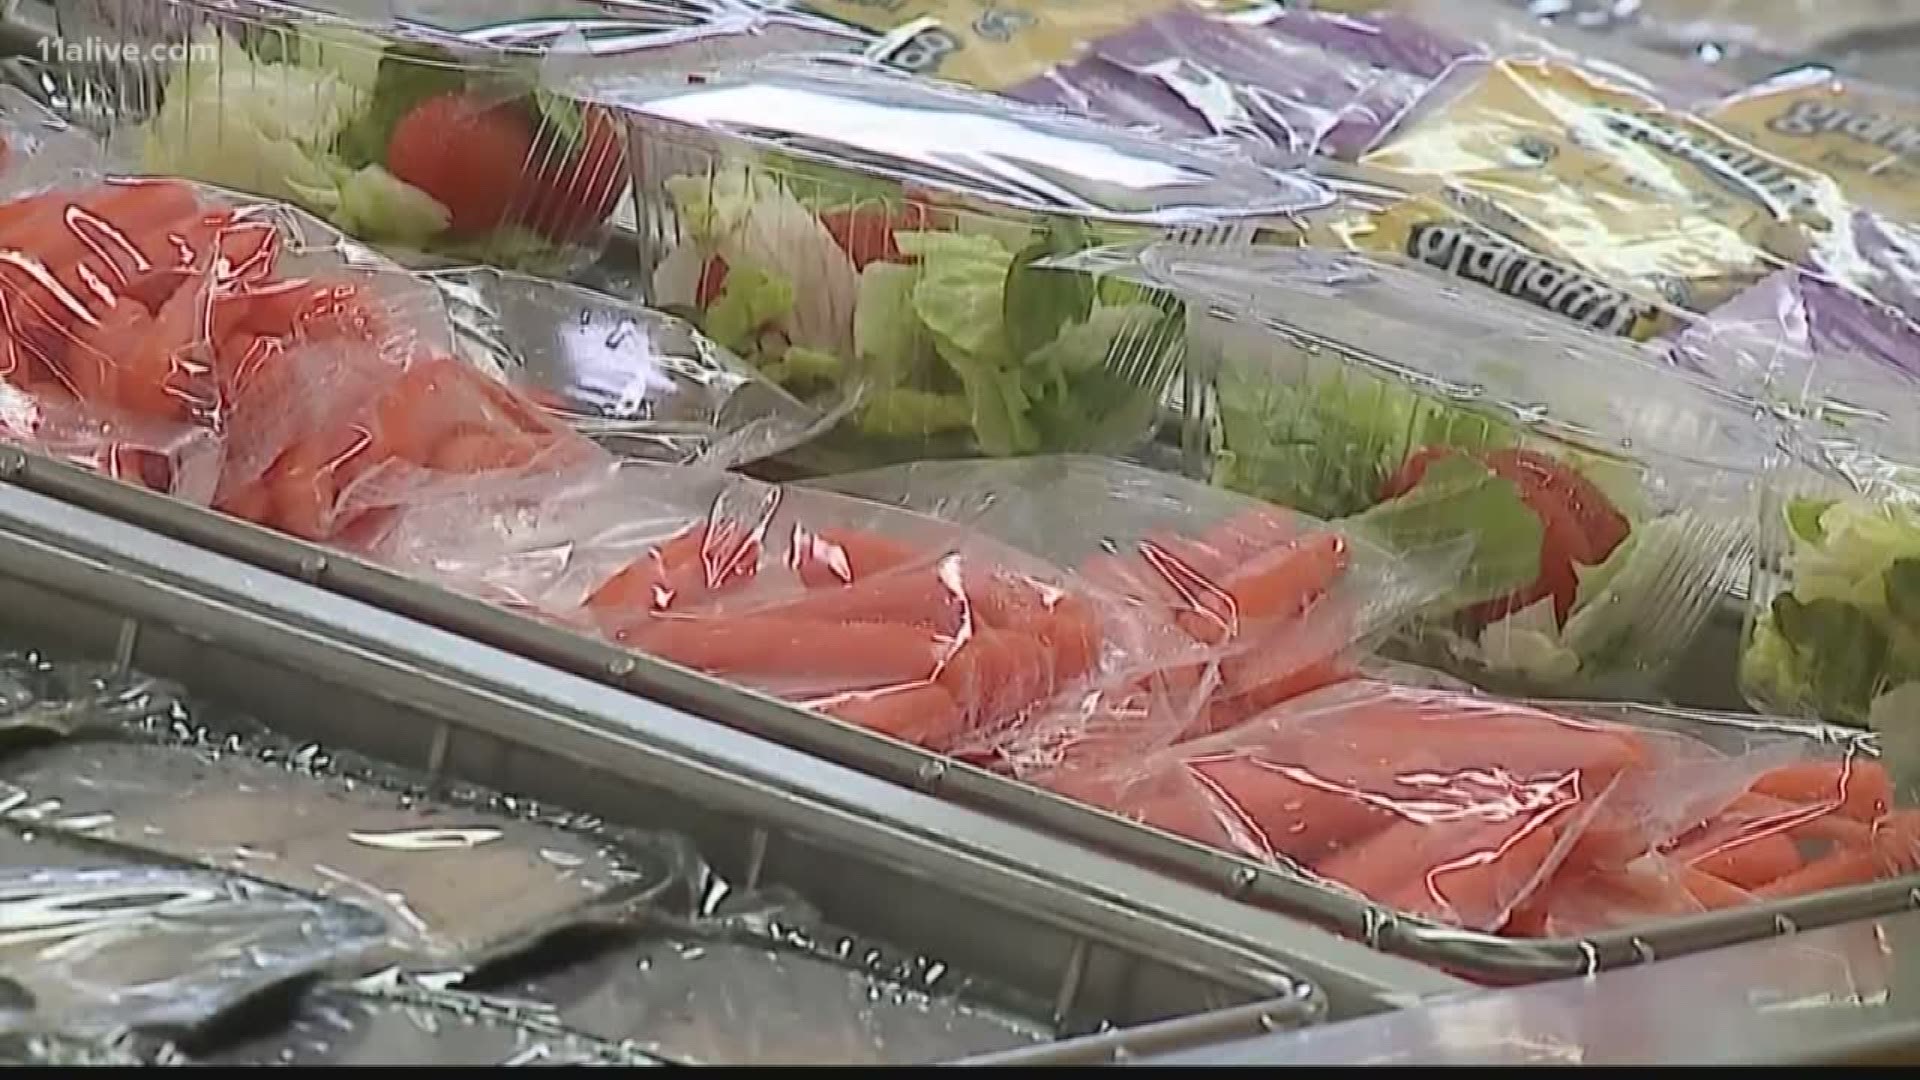 With numerous school districts closing across the Atlanta area and around Georgia due to the coronavirus outbreak, families who rely on school meals are finding them